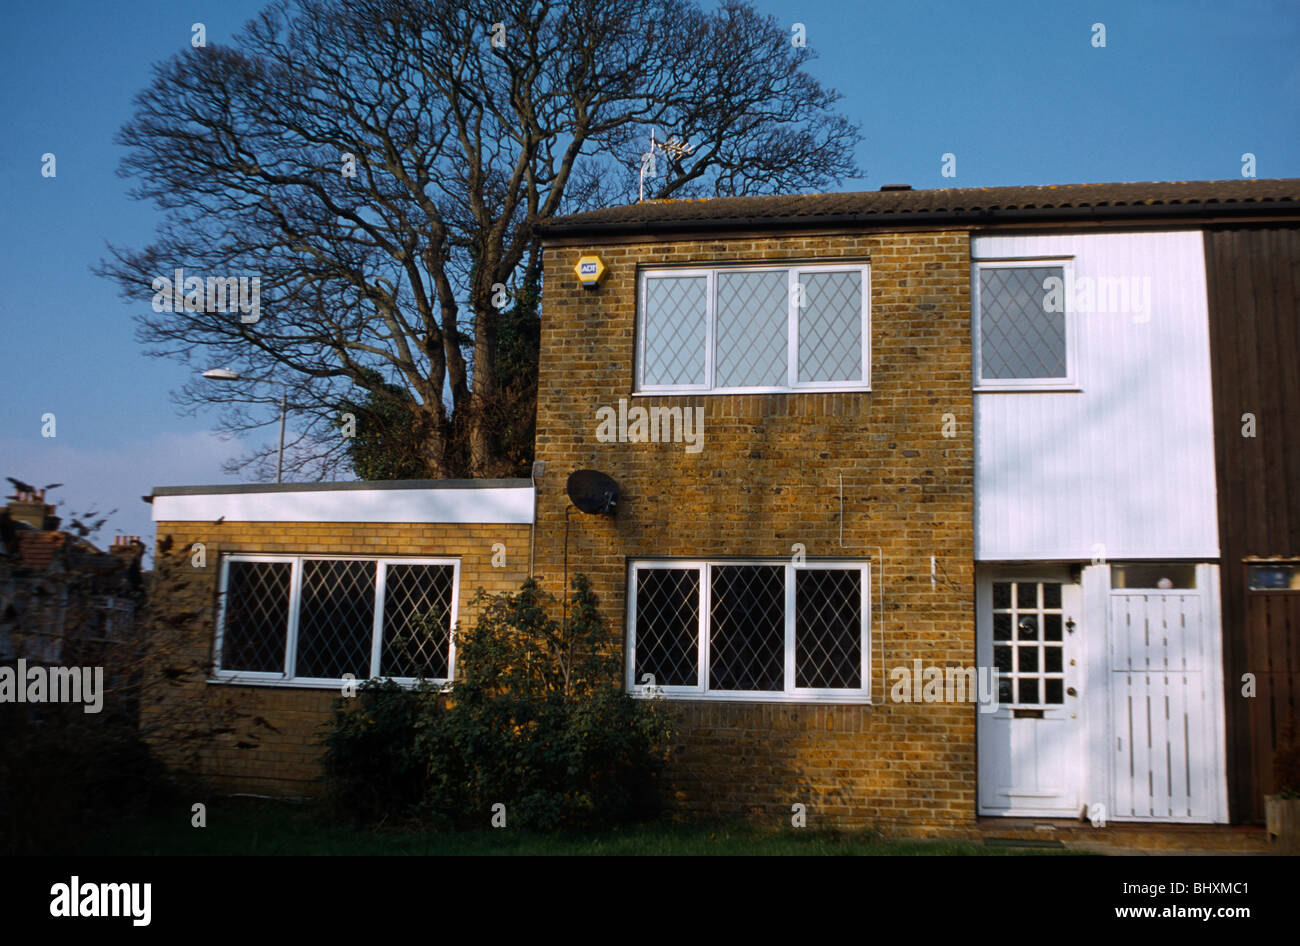 Semi Detached House With Extension On Side Leaded Light Effect In Windows Stock Photo